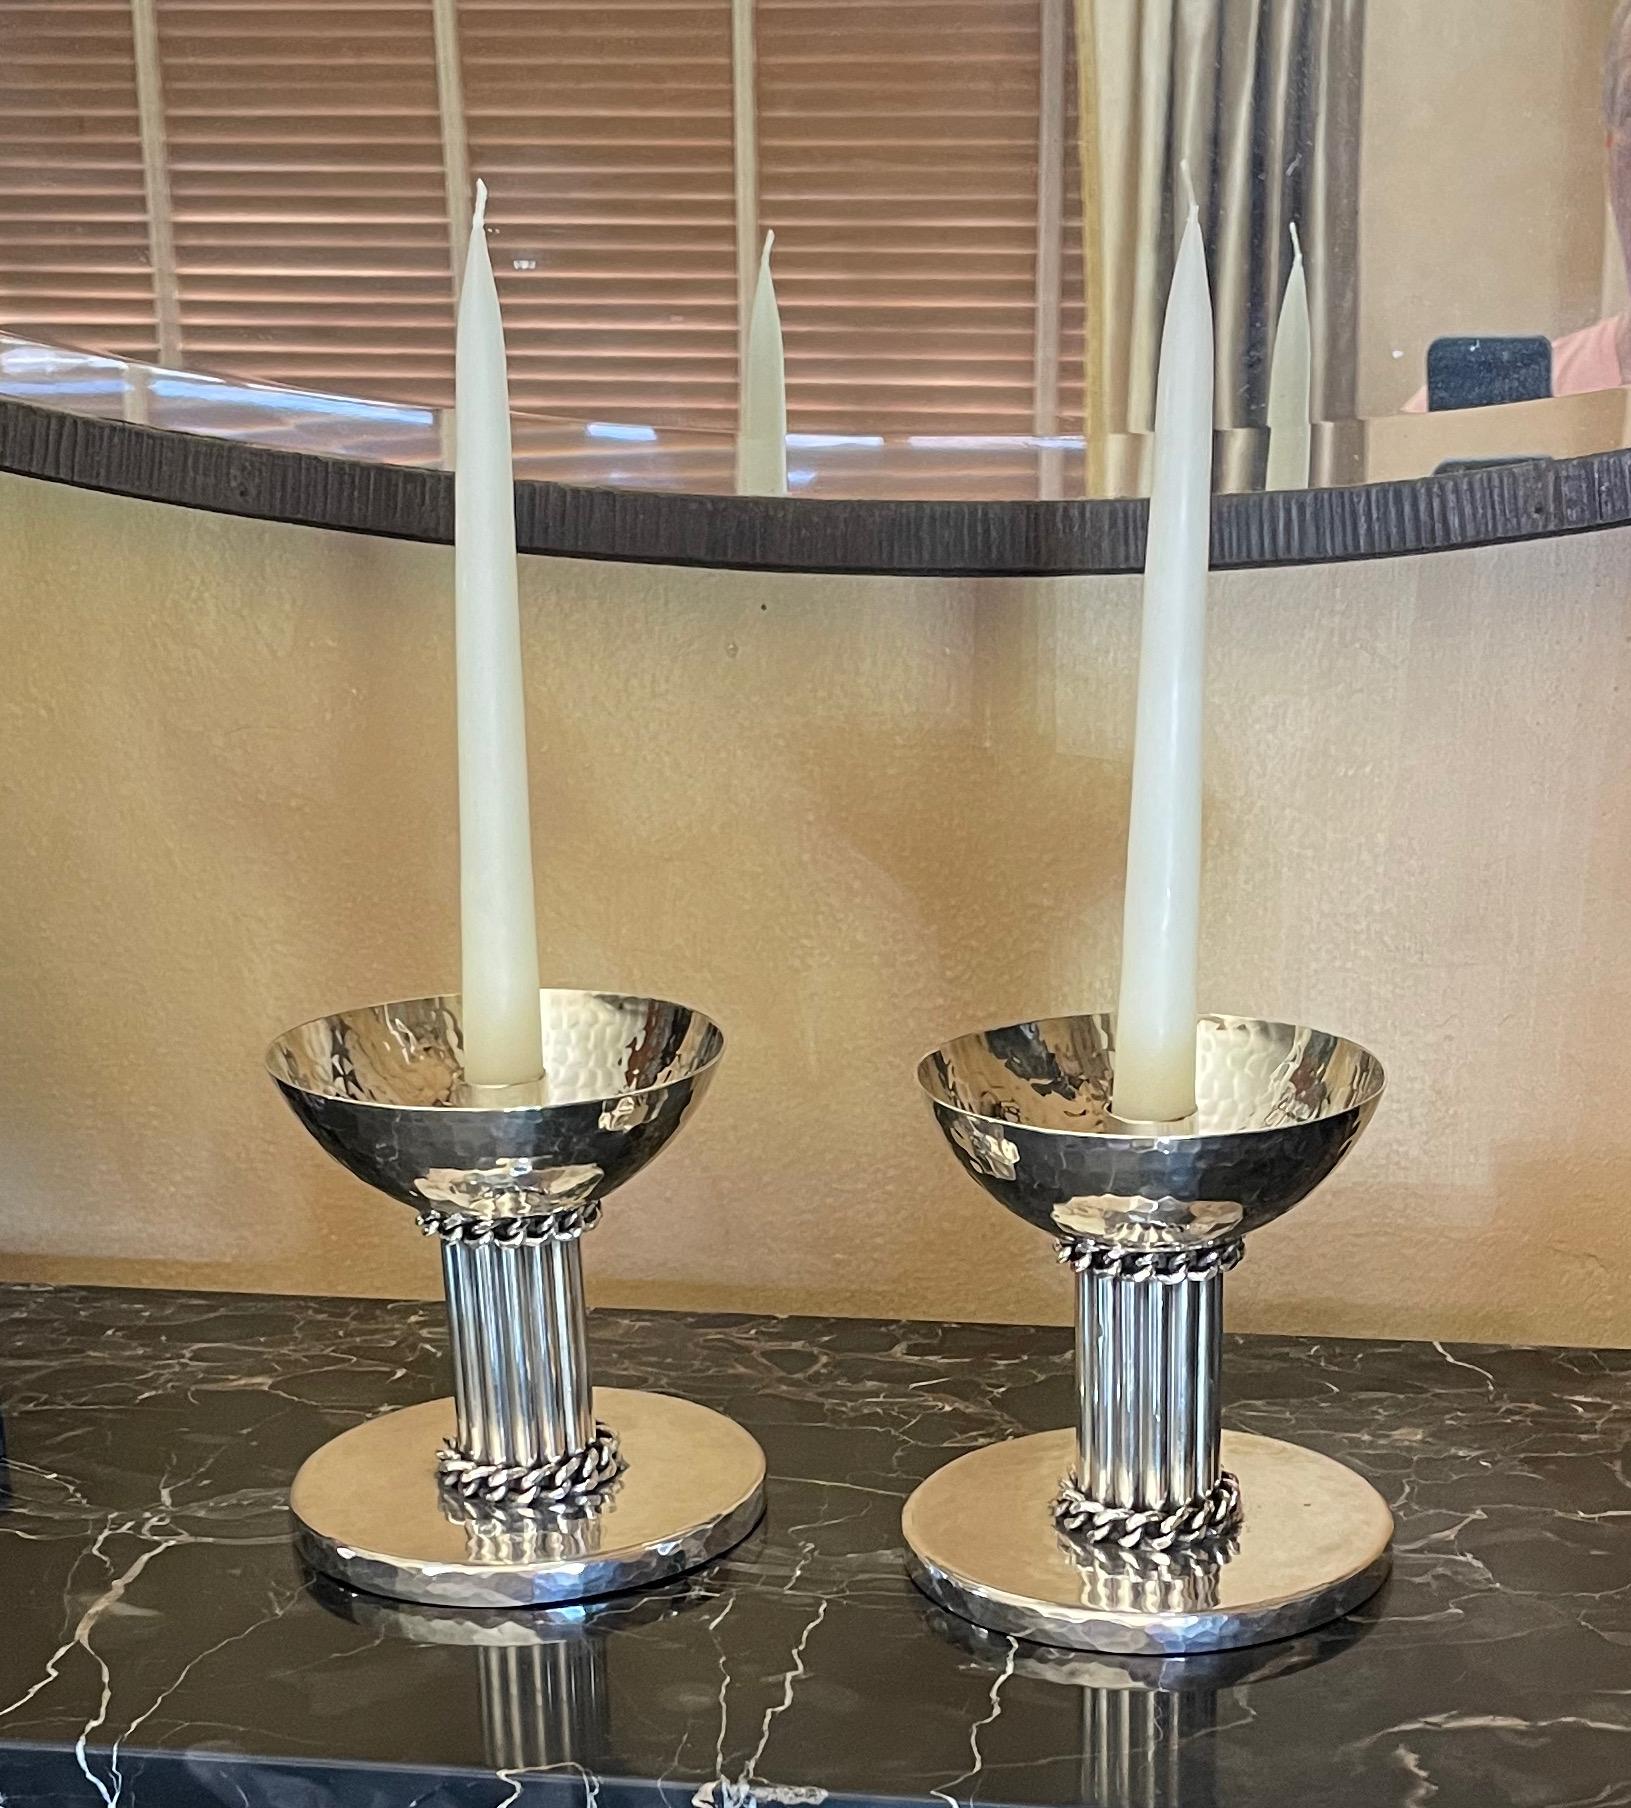 Jean Despres important French designer, known for original jewelry designs, champagne buckets, cocktail shakers, and many fine objects of art. This spectacular pair of heavy candlesticks with a hand signature on the bottom of each candlestick, sign